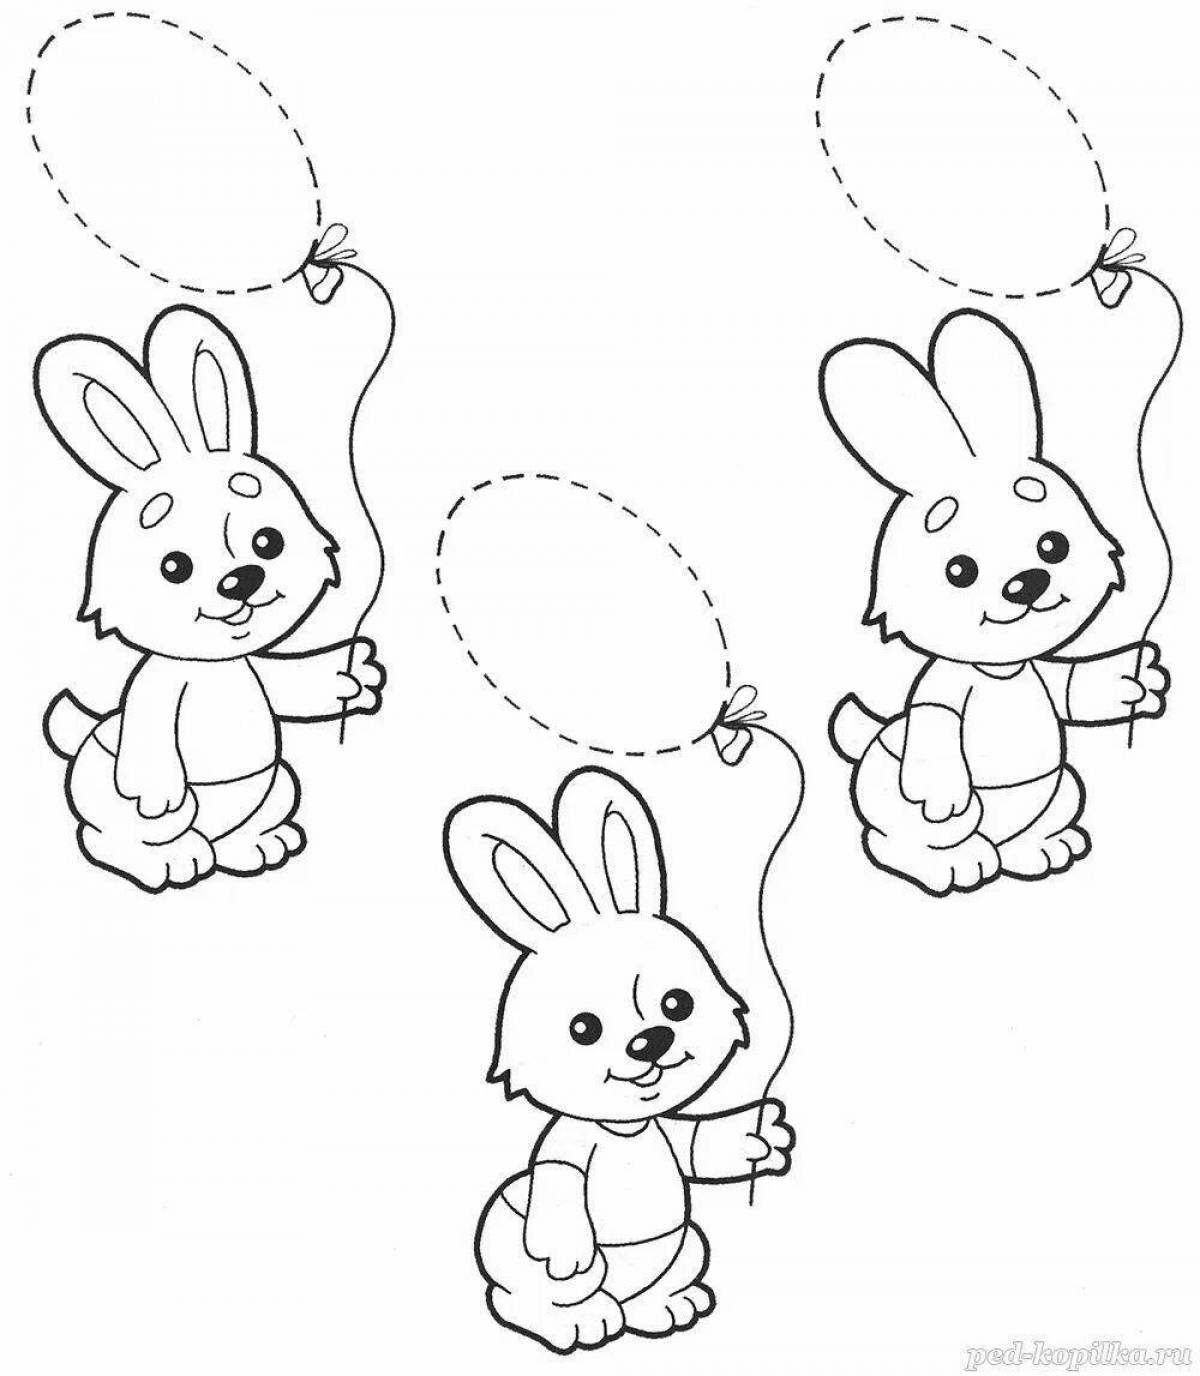 Coloring rabbit with taste for children 2-3 years old